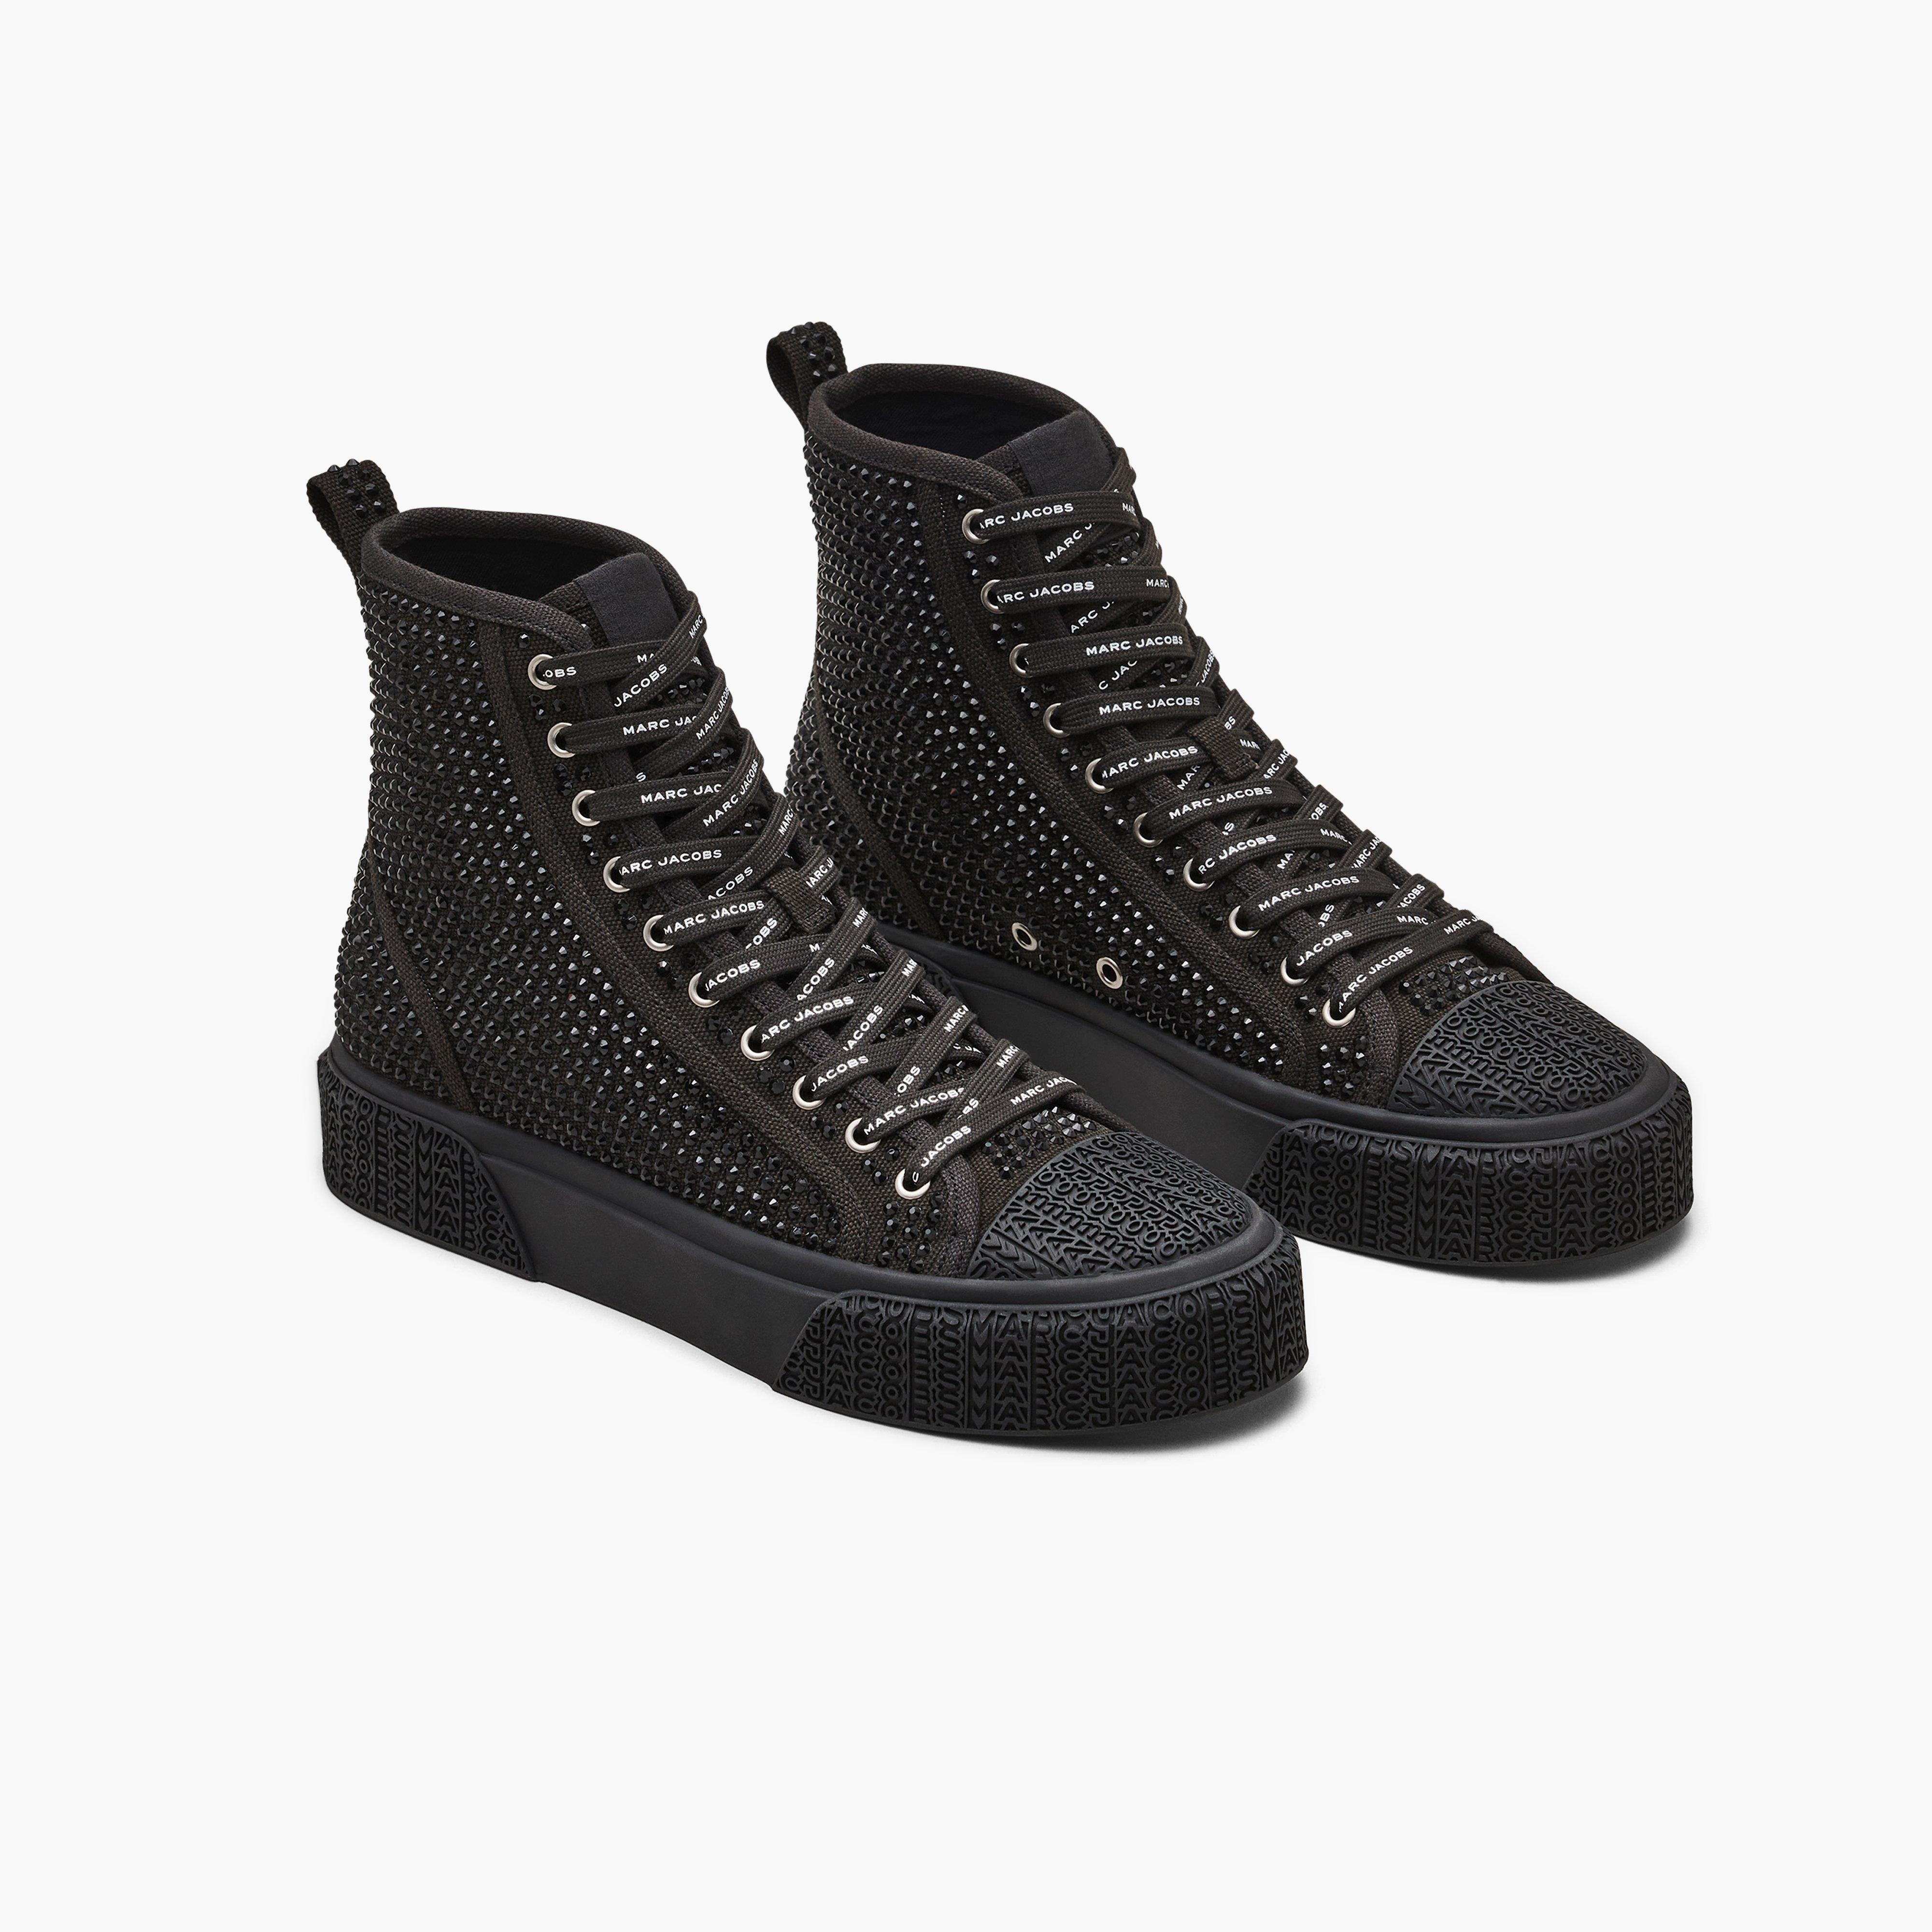 THE CRYSTAL CANVAS HIGH TOP SNEAKER - 1